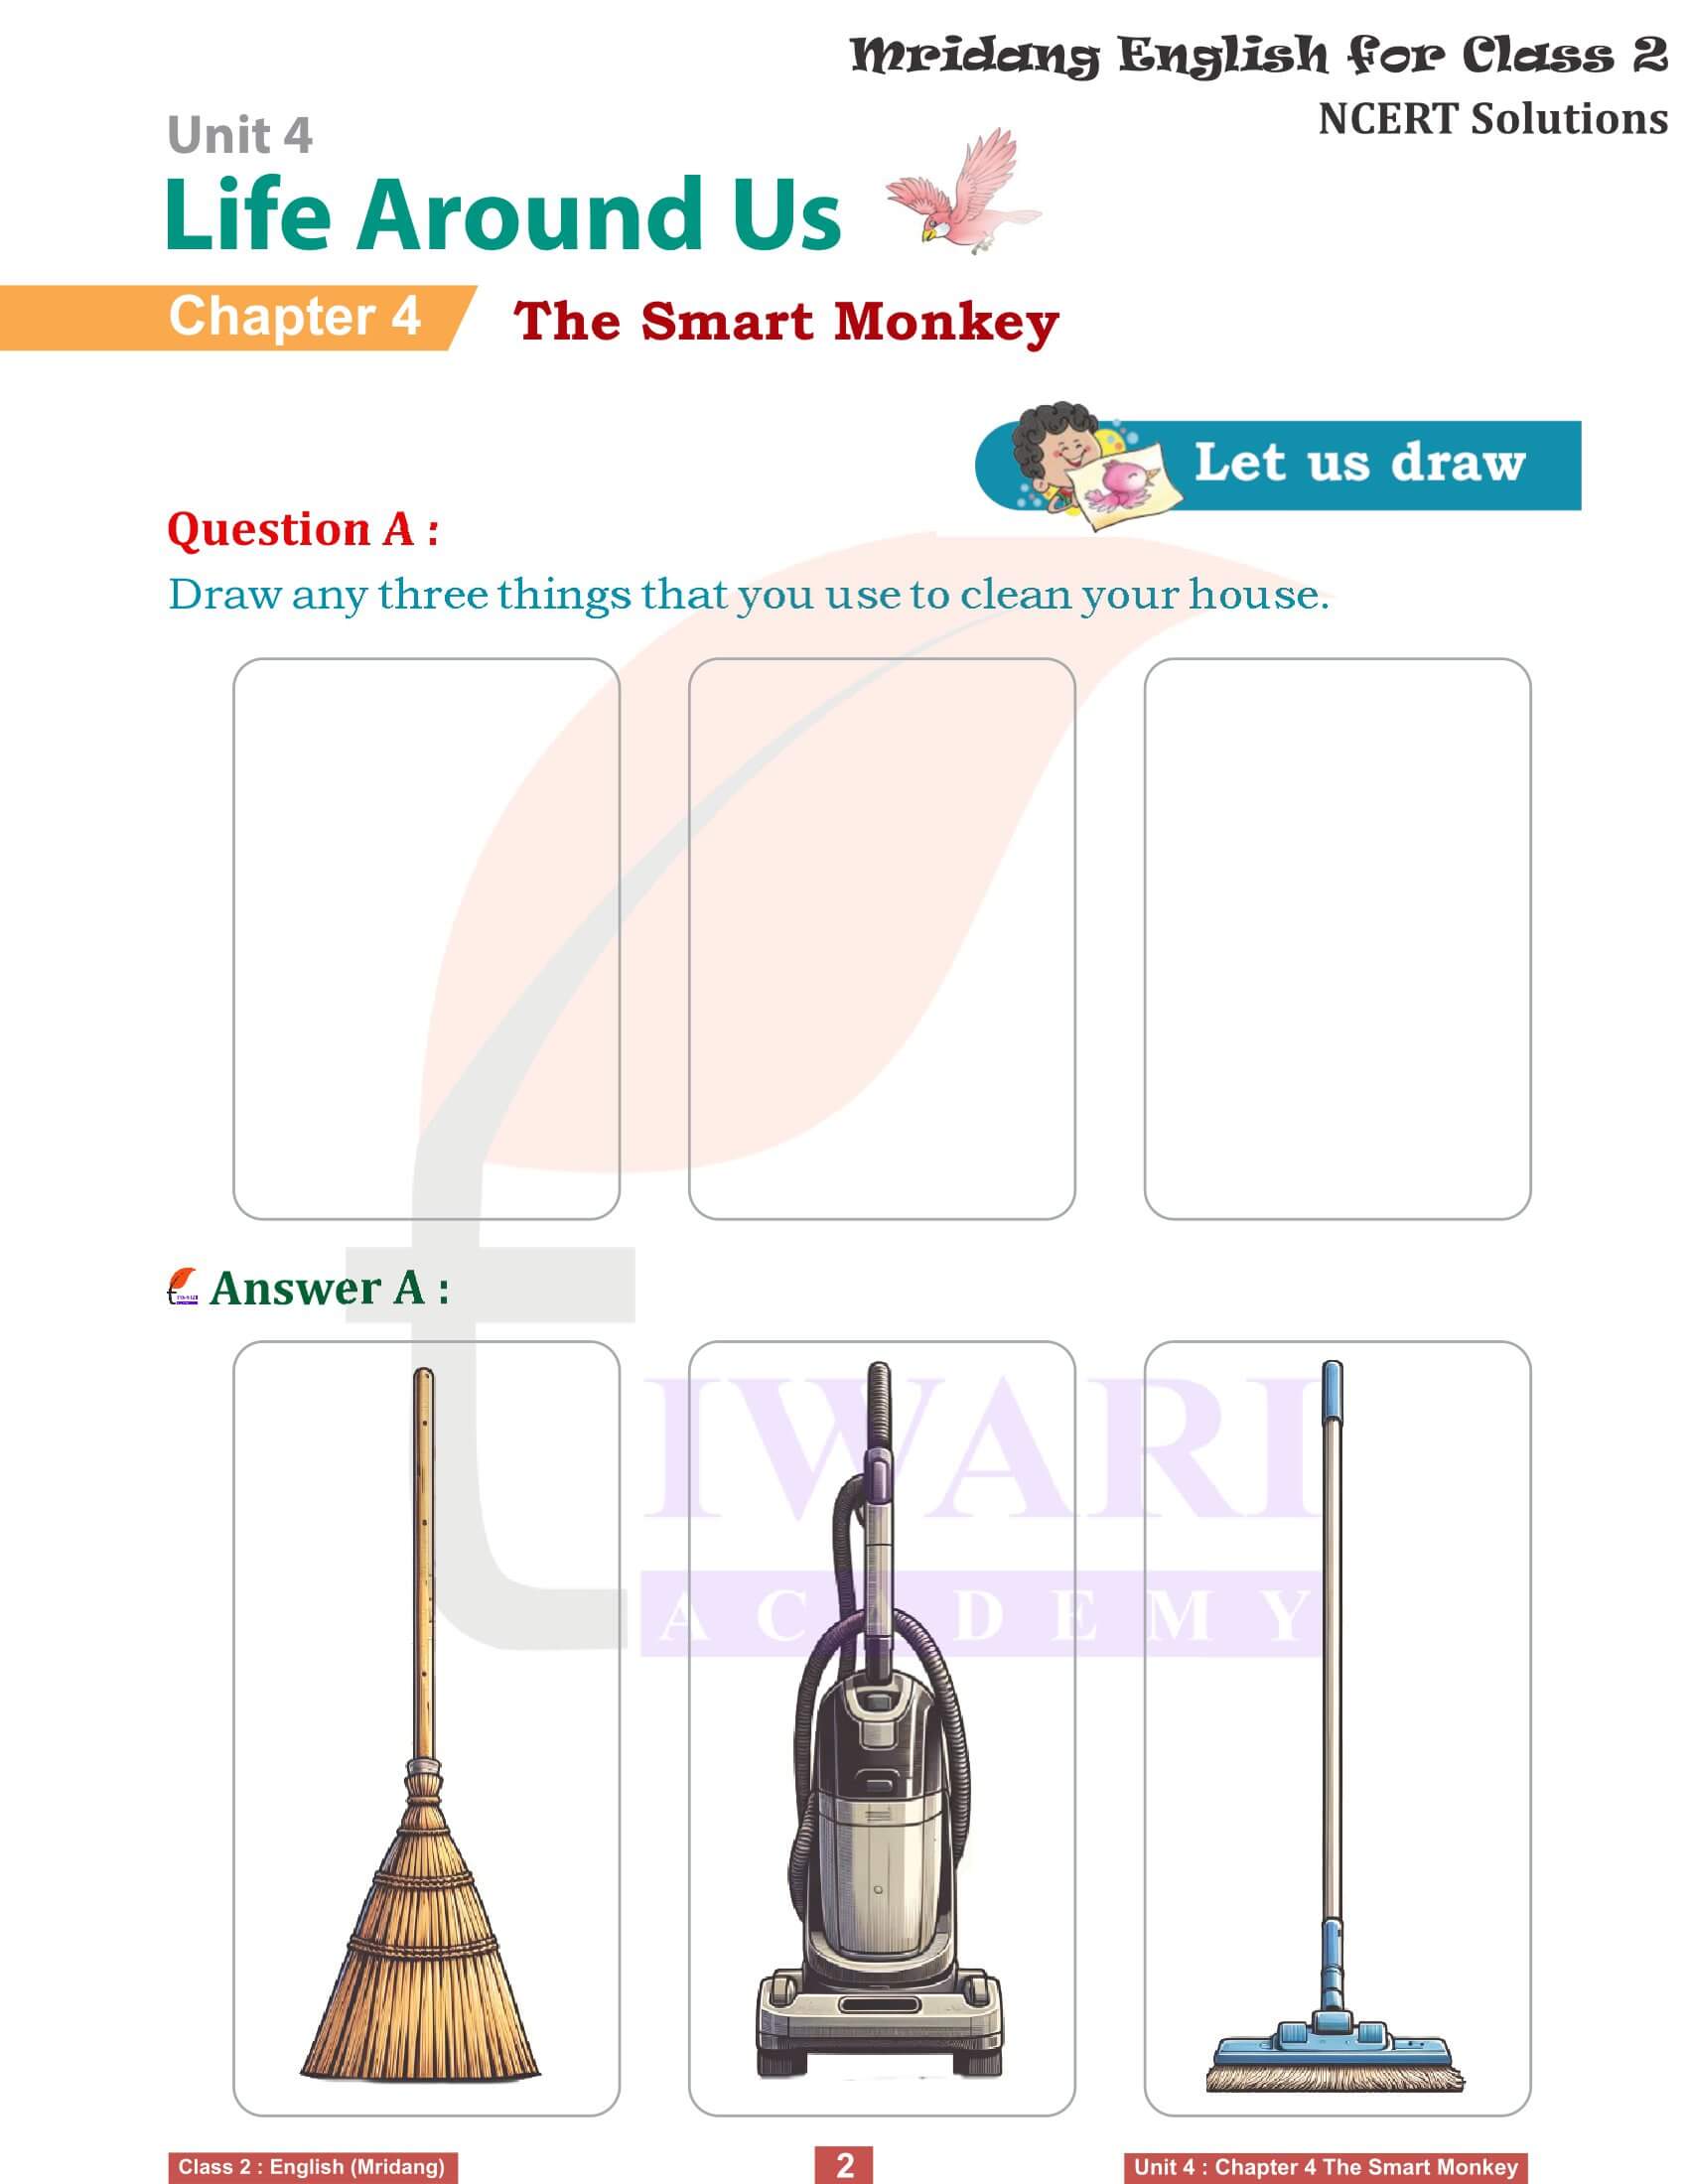 NCERT Solutions for Class 2 English Mridang Unit 4 Life Around Us Chapter 4 The Smart Monkey Solutions